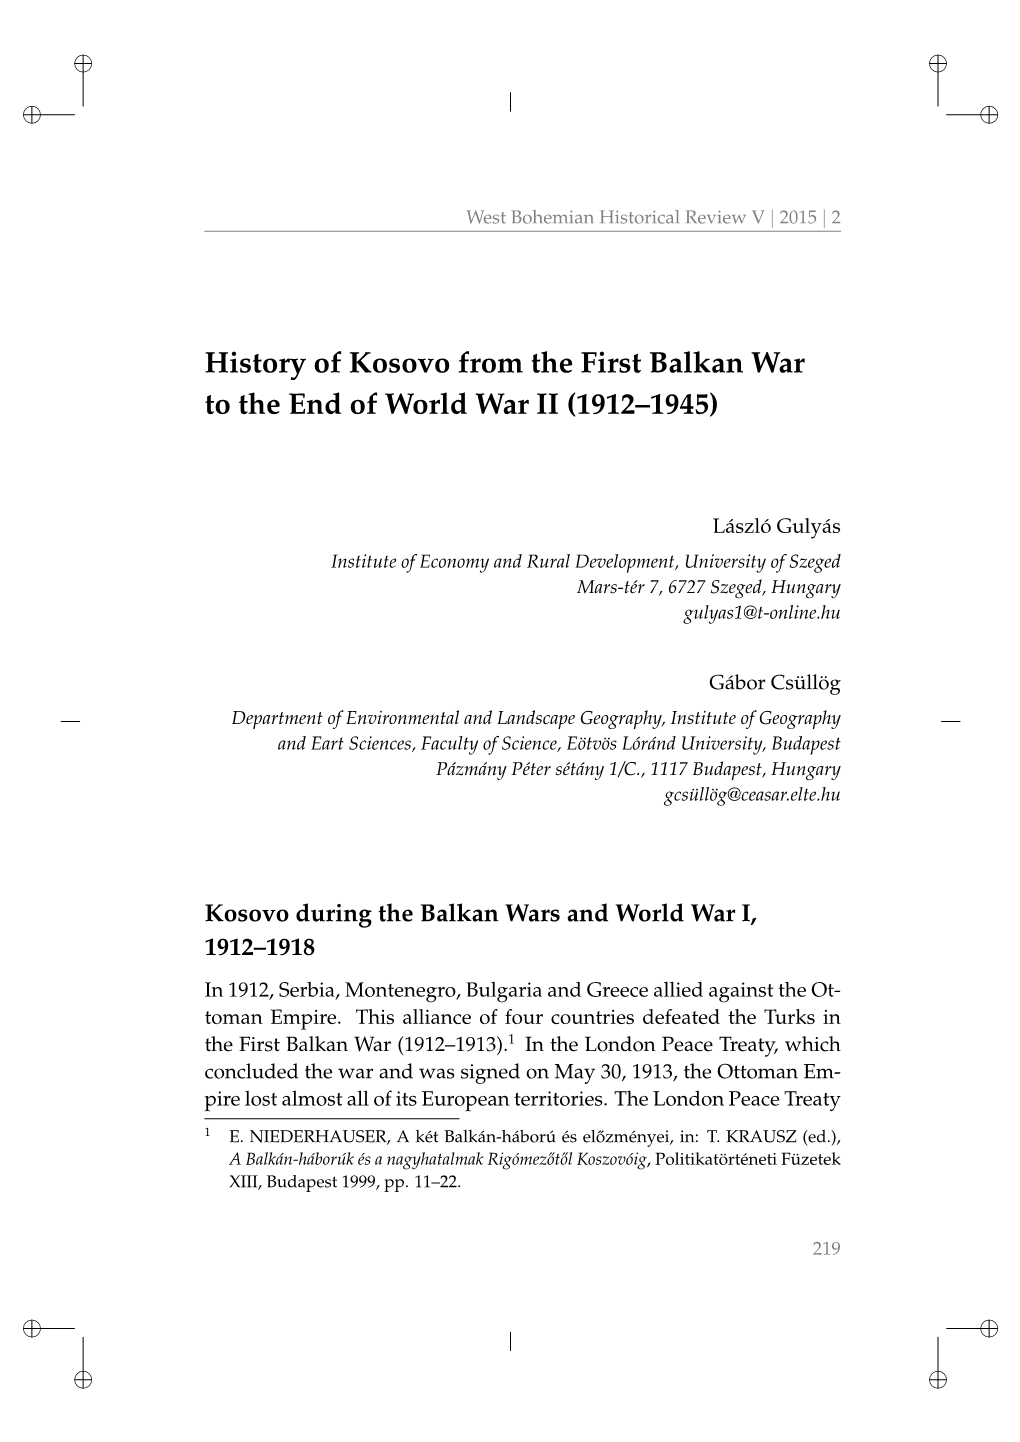 History of Kosovo from the First Balkan War to the End of World War II (1912–1945)